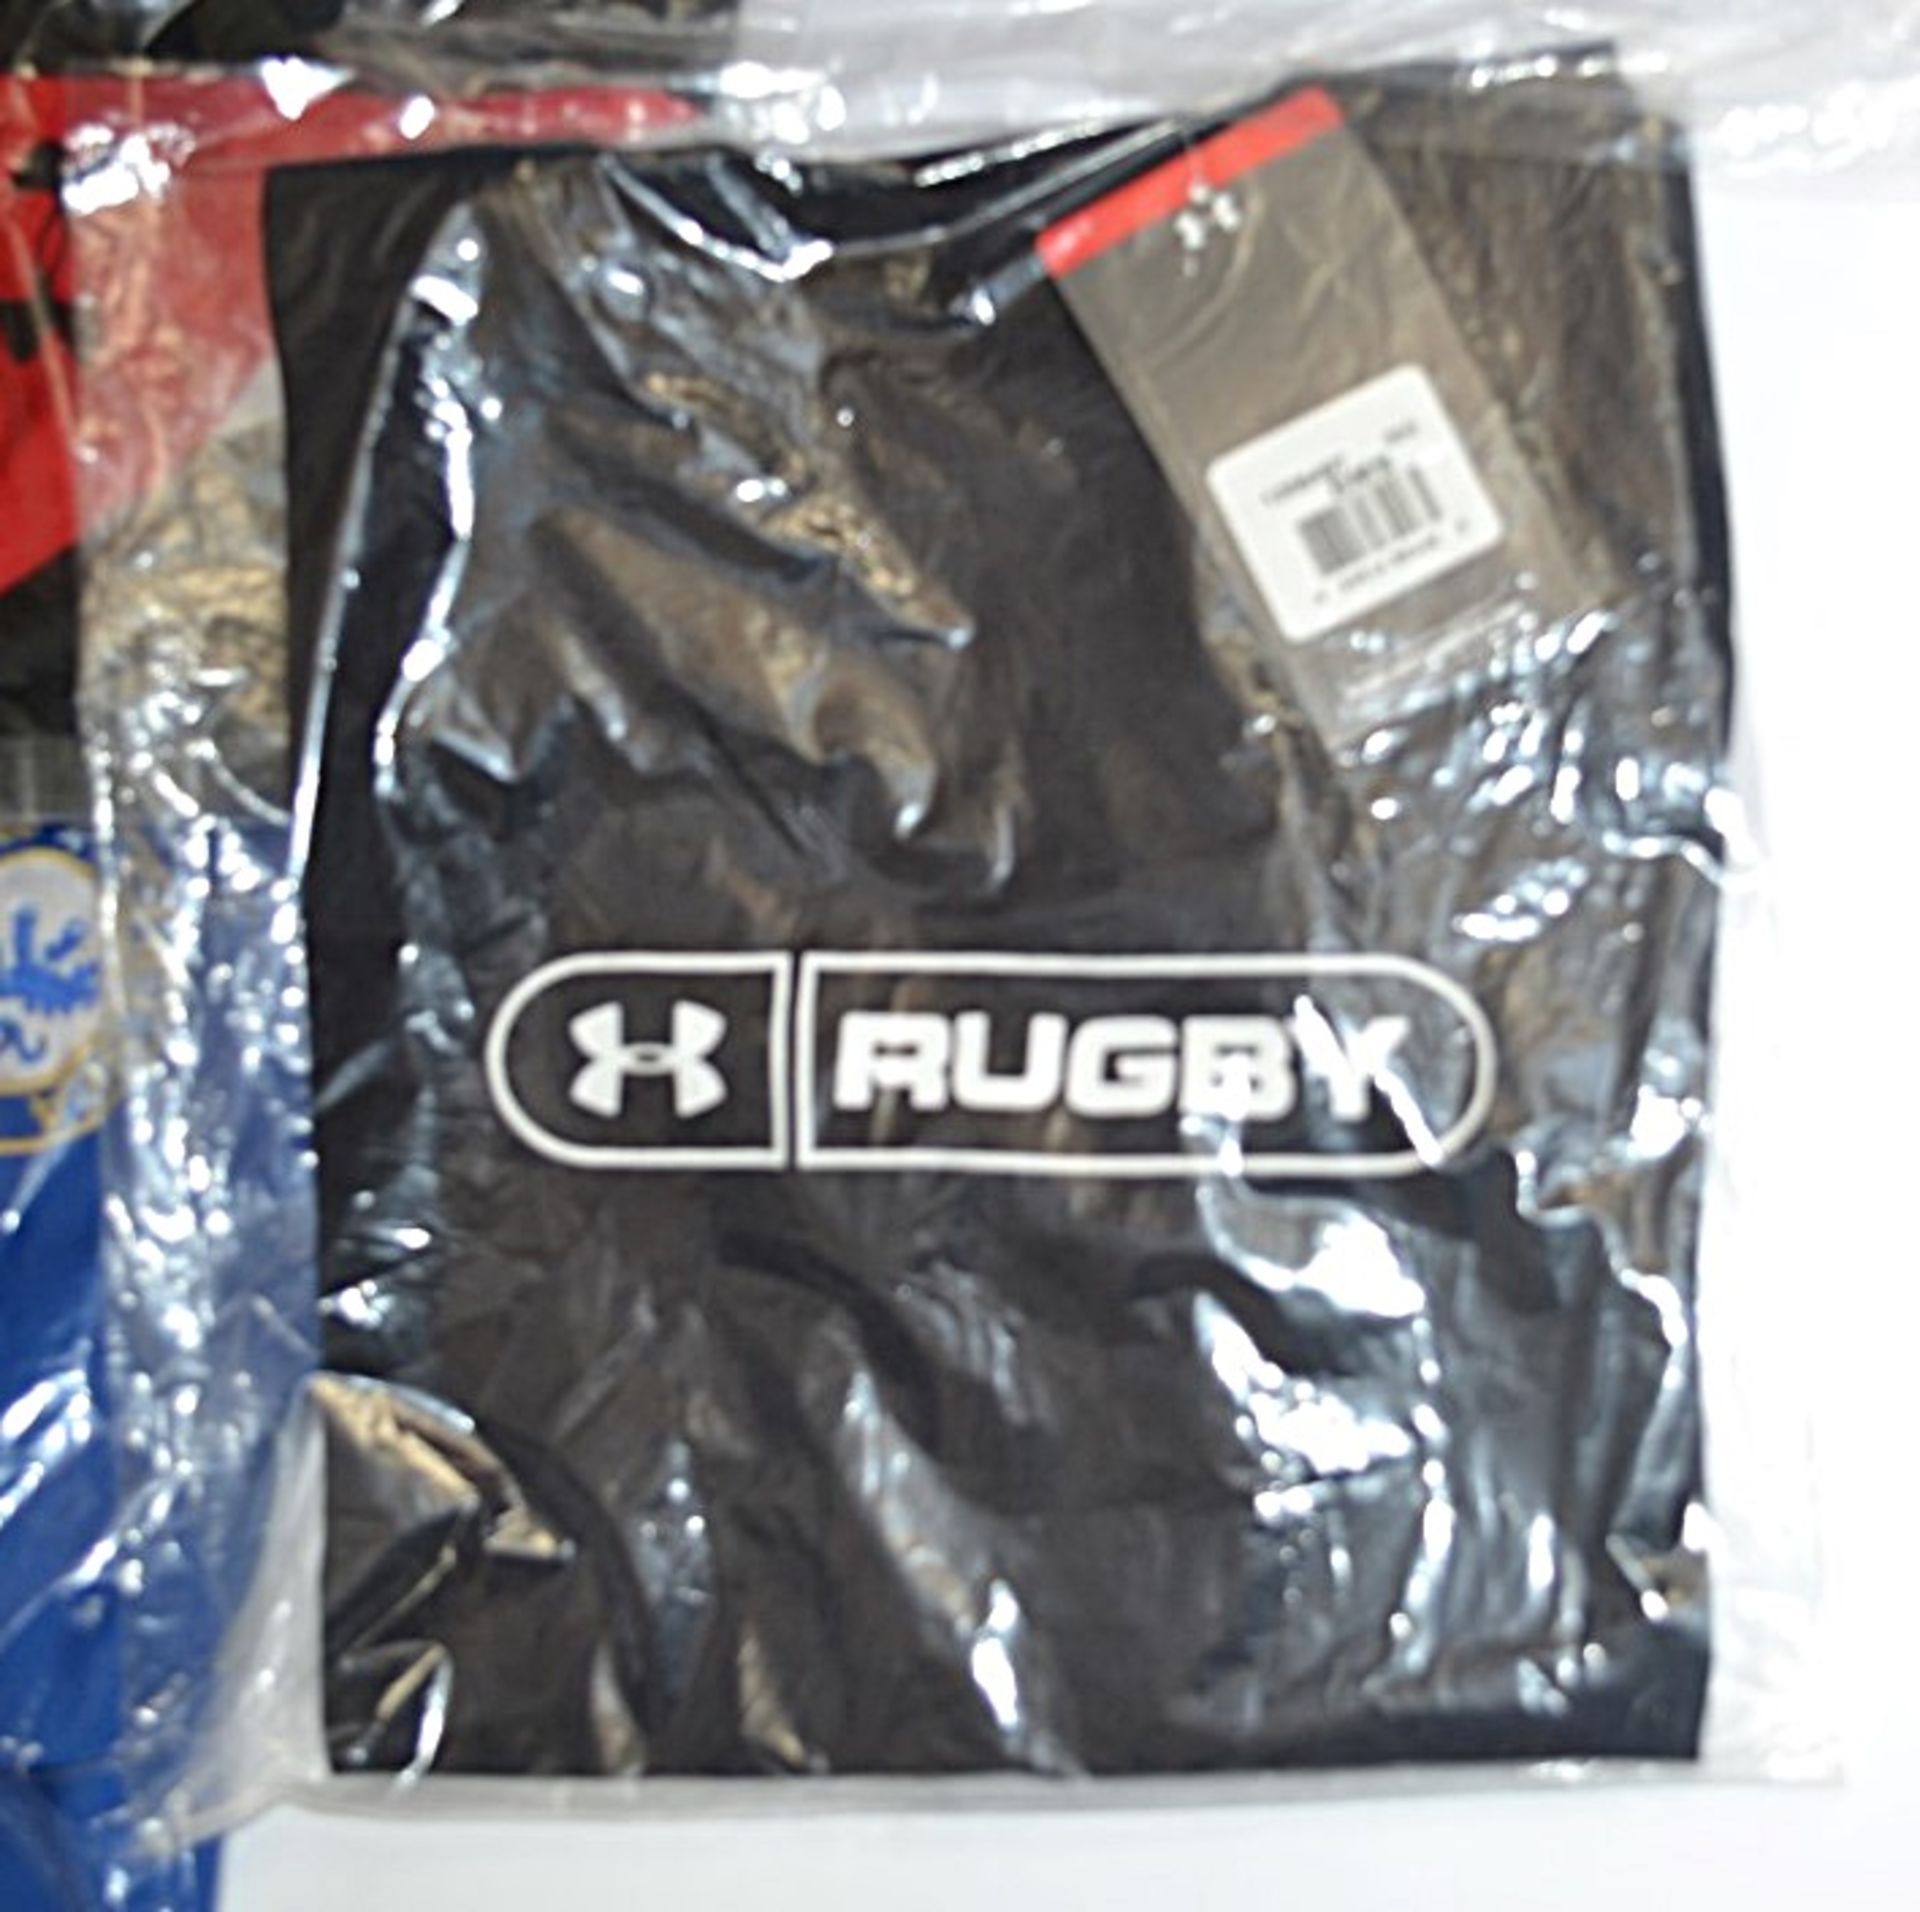 25 x Assorted Items Of Branded and Non-branded Sportswear Including Puma, Nike & Champion - Sizes: - Image 7 of 8